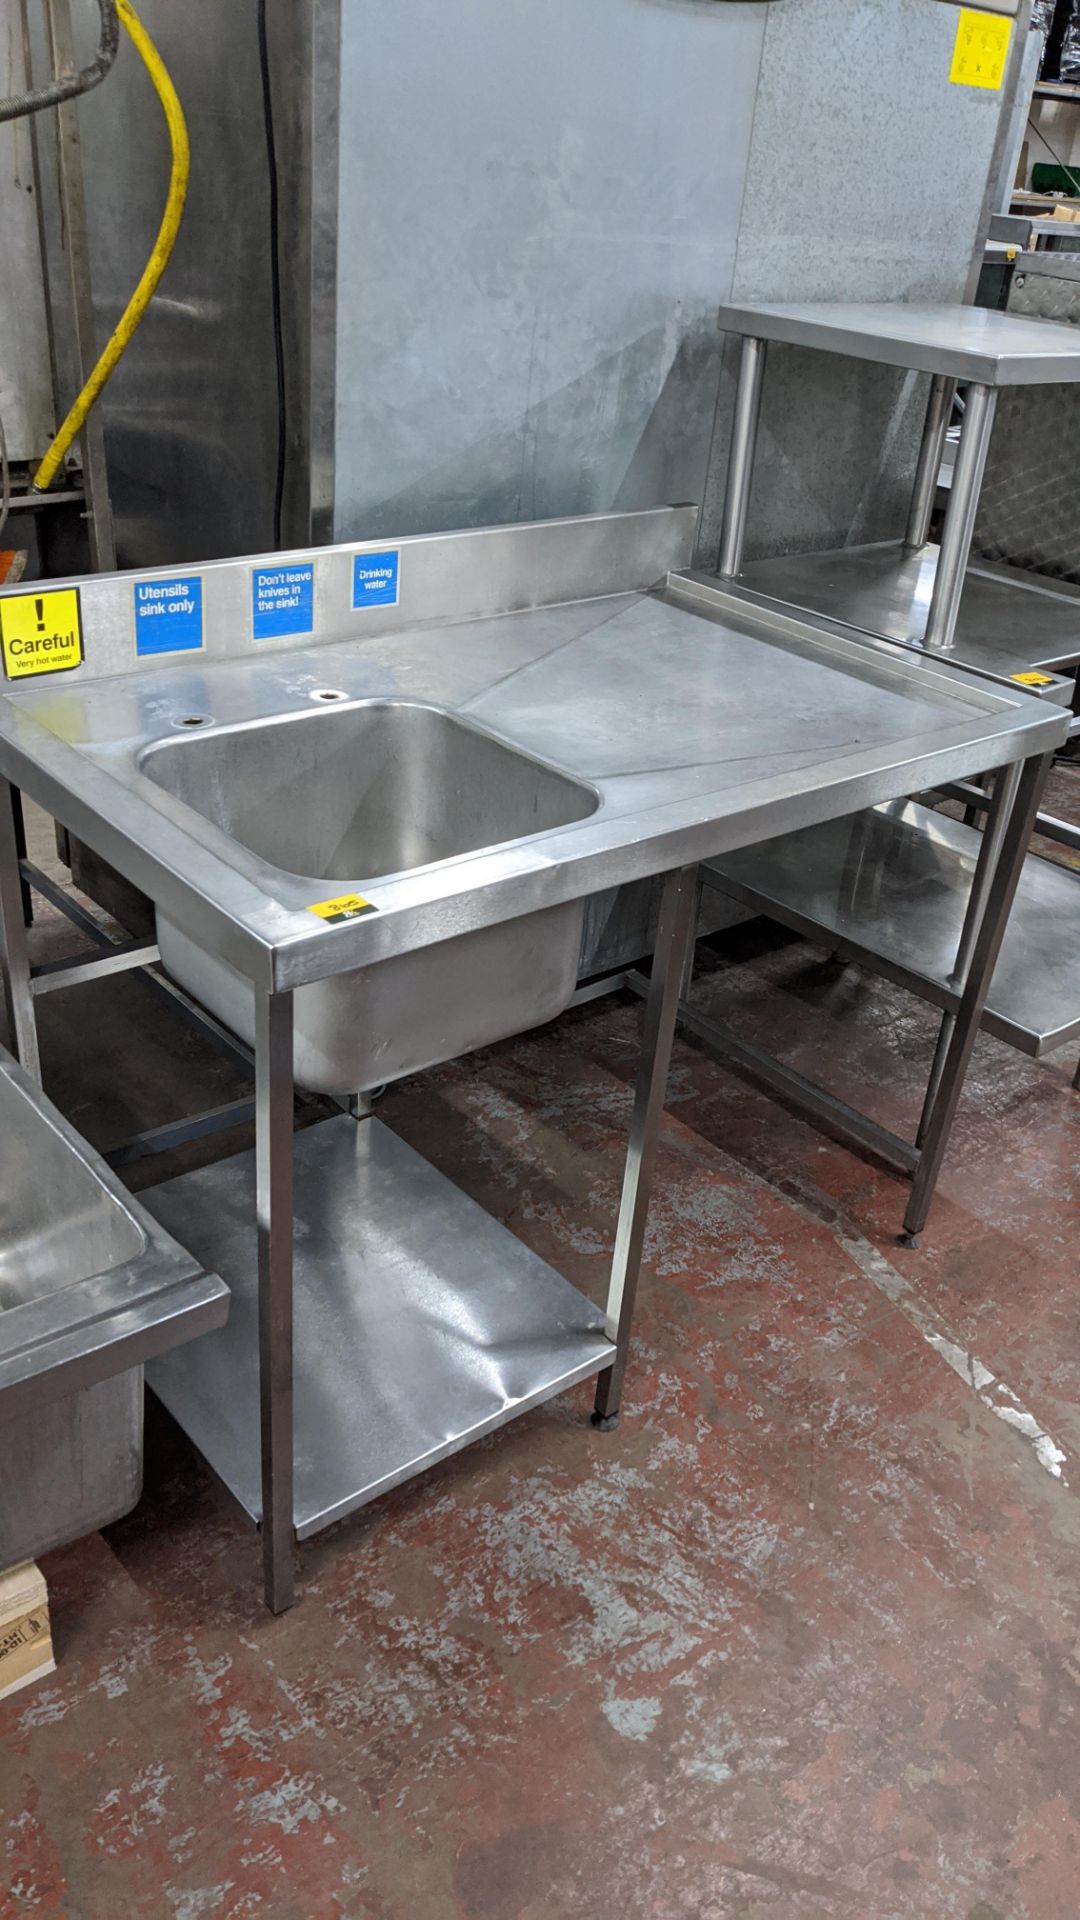 Stainless steel floorstanding single bowl sink with drainer & small shelf below, max dimensions - Image 4 of 4